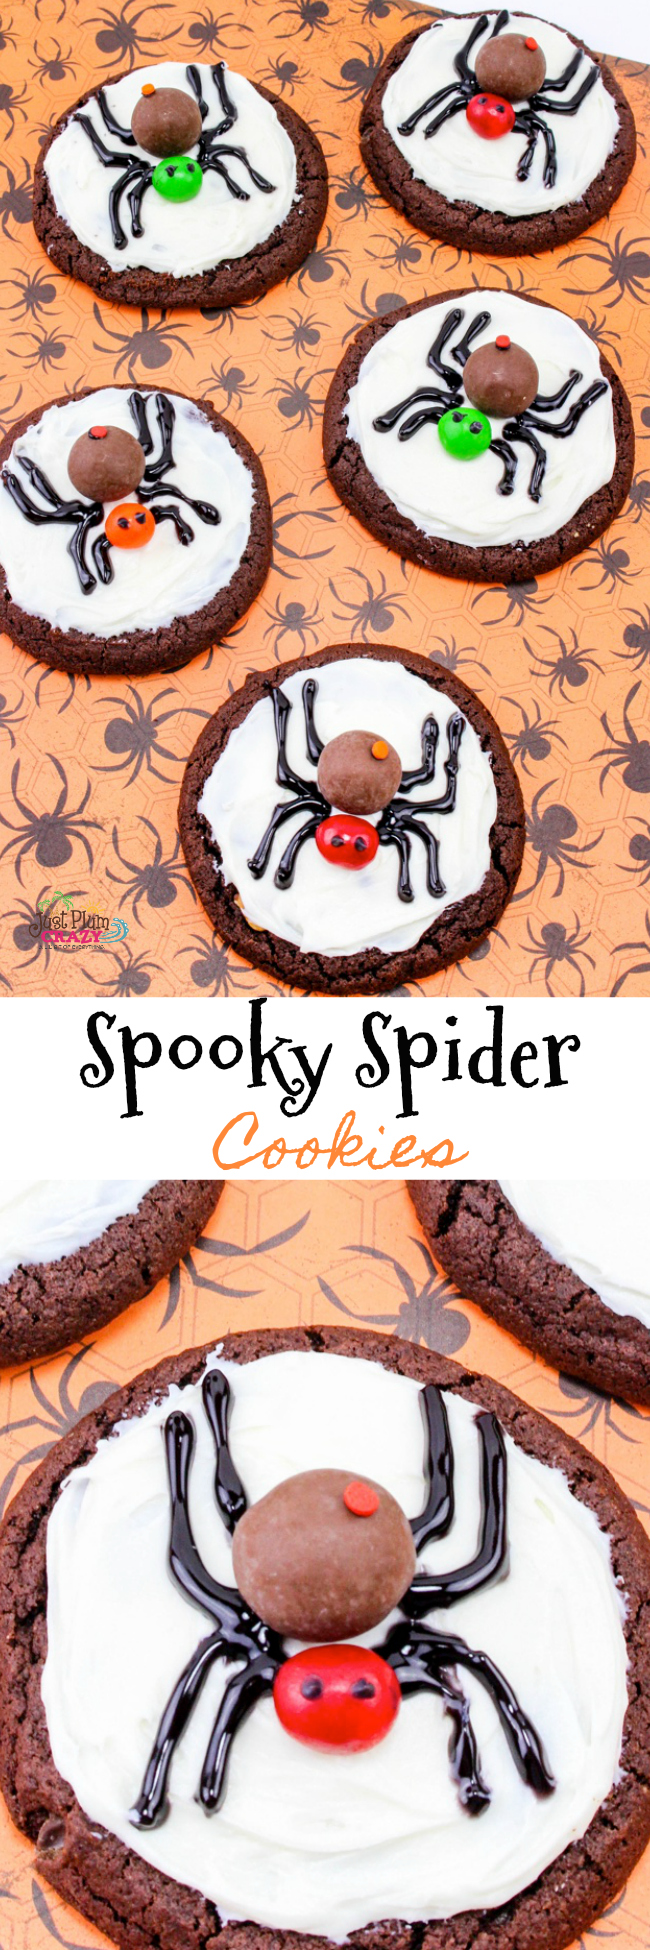 There's nothing spooky about these spider cookies but they go together perfectly with the Spider Web Cupcakes recipe that we just shared.